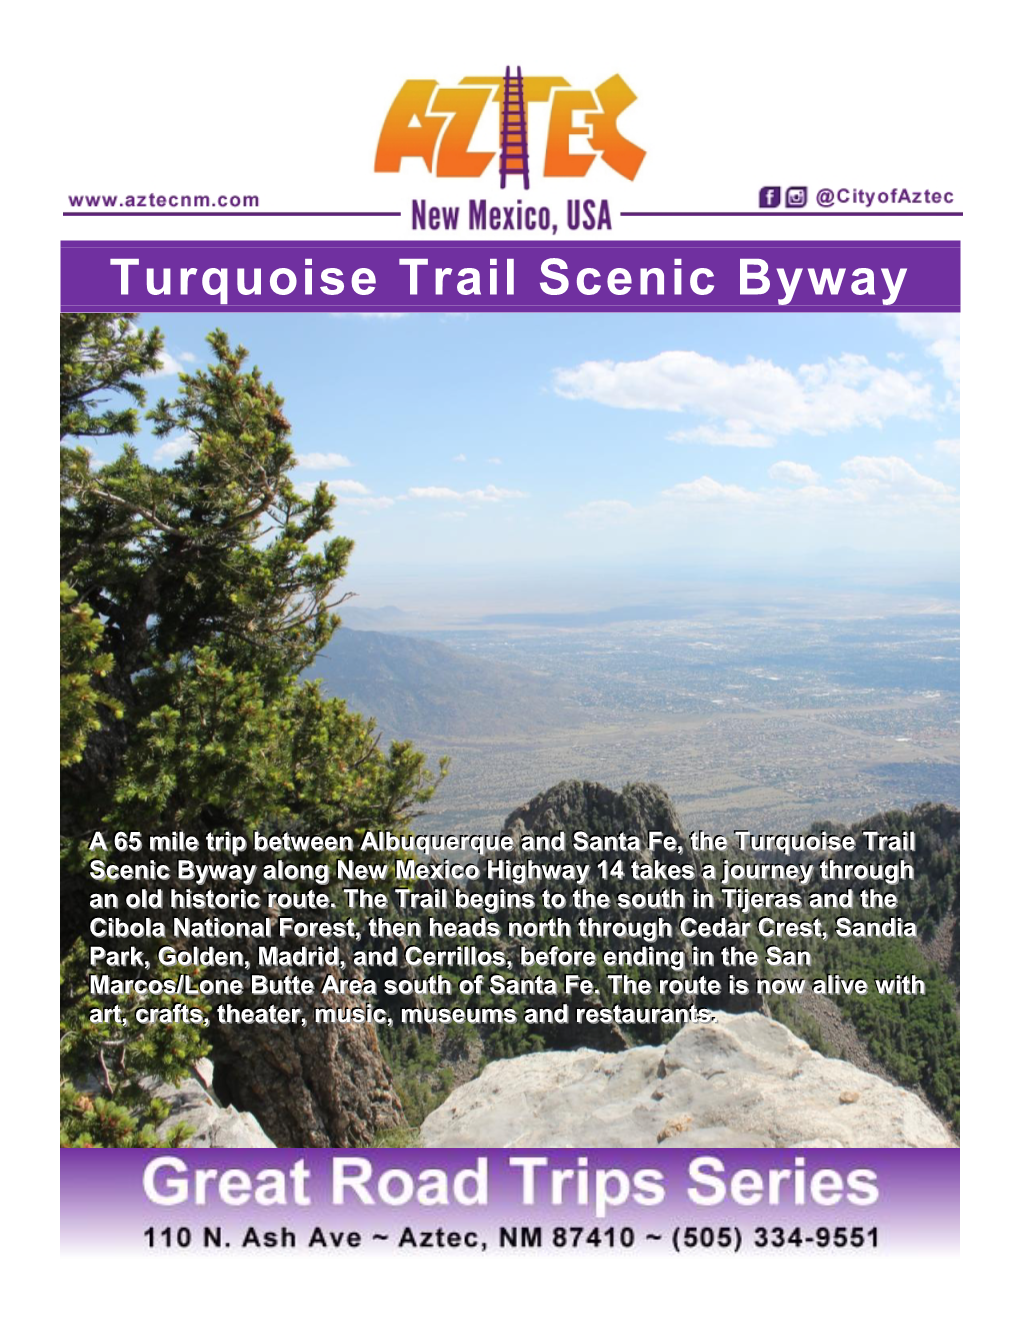 Turquoise Trail Scenic Byway